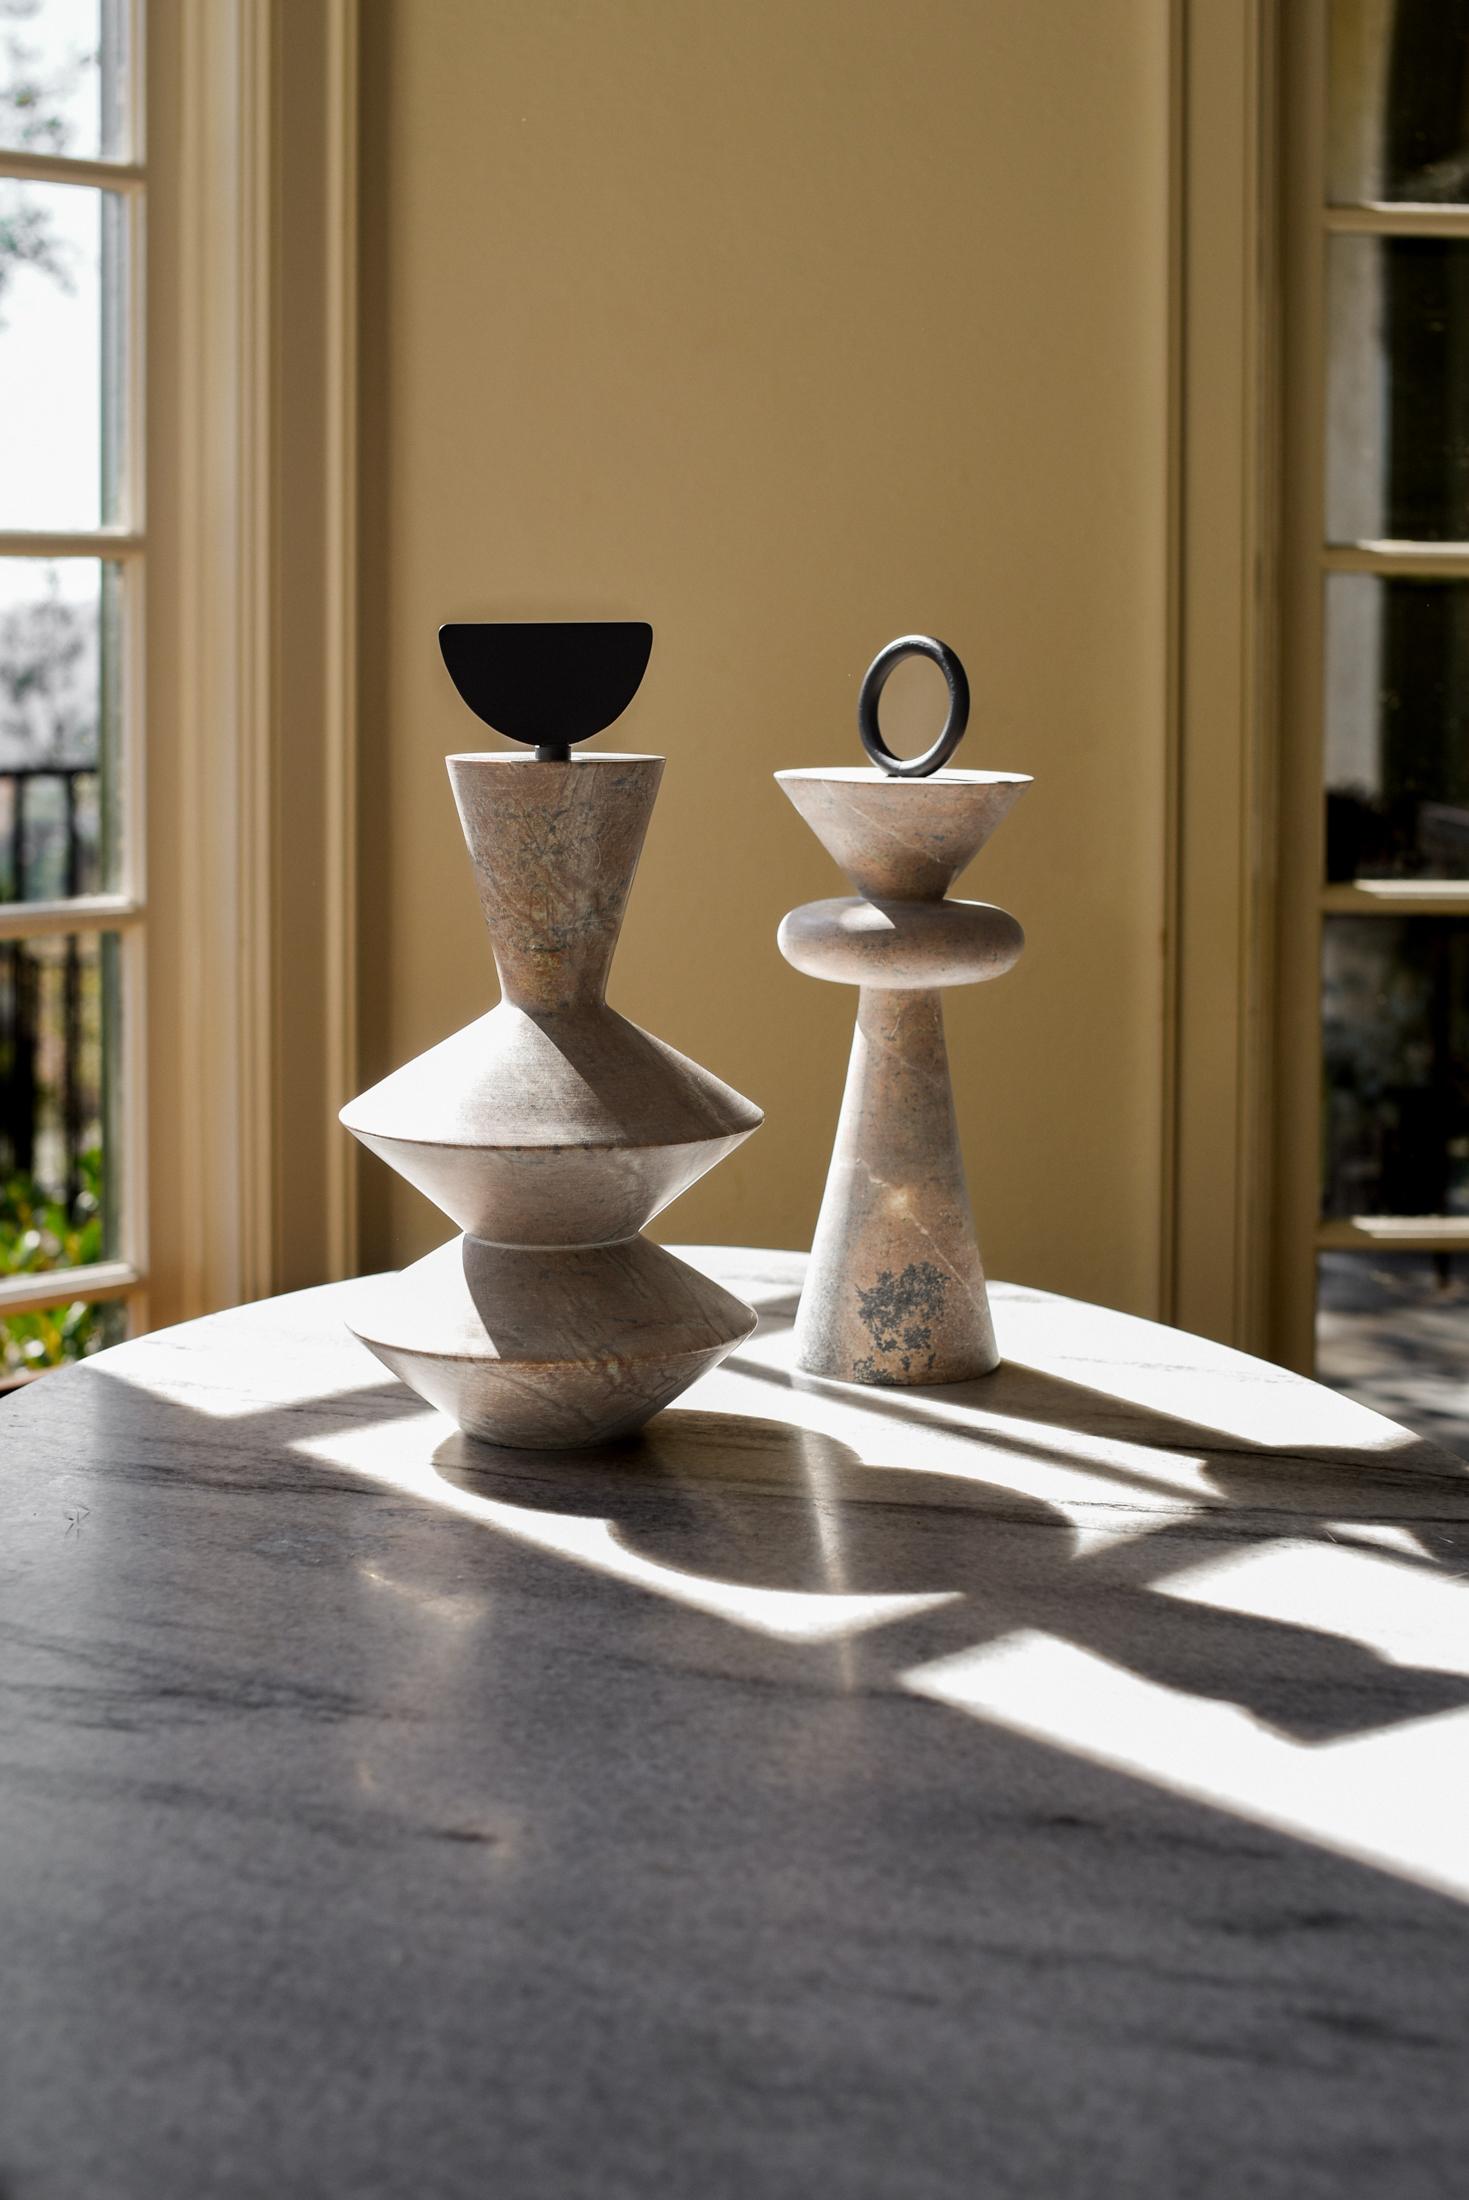 Soapstone is skillfully milled into graceful geometric shapes, creating totem sculptures that maintain a purity of form and balance of lines. A sense of movement and intrigue is provided by the addition of carbon steel ornamentation. Elegantly